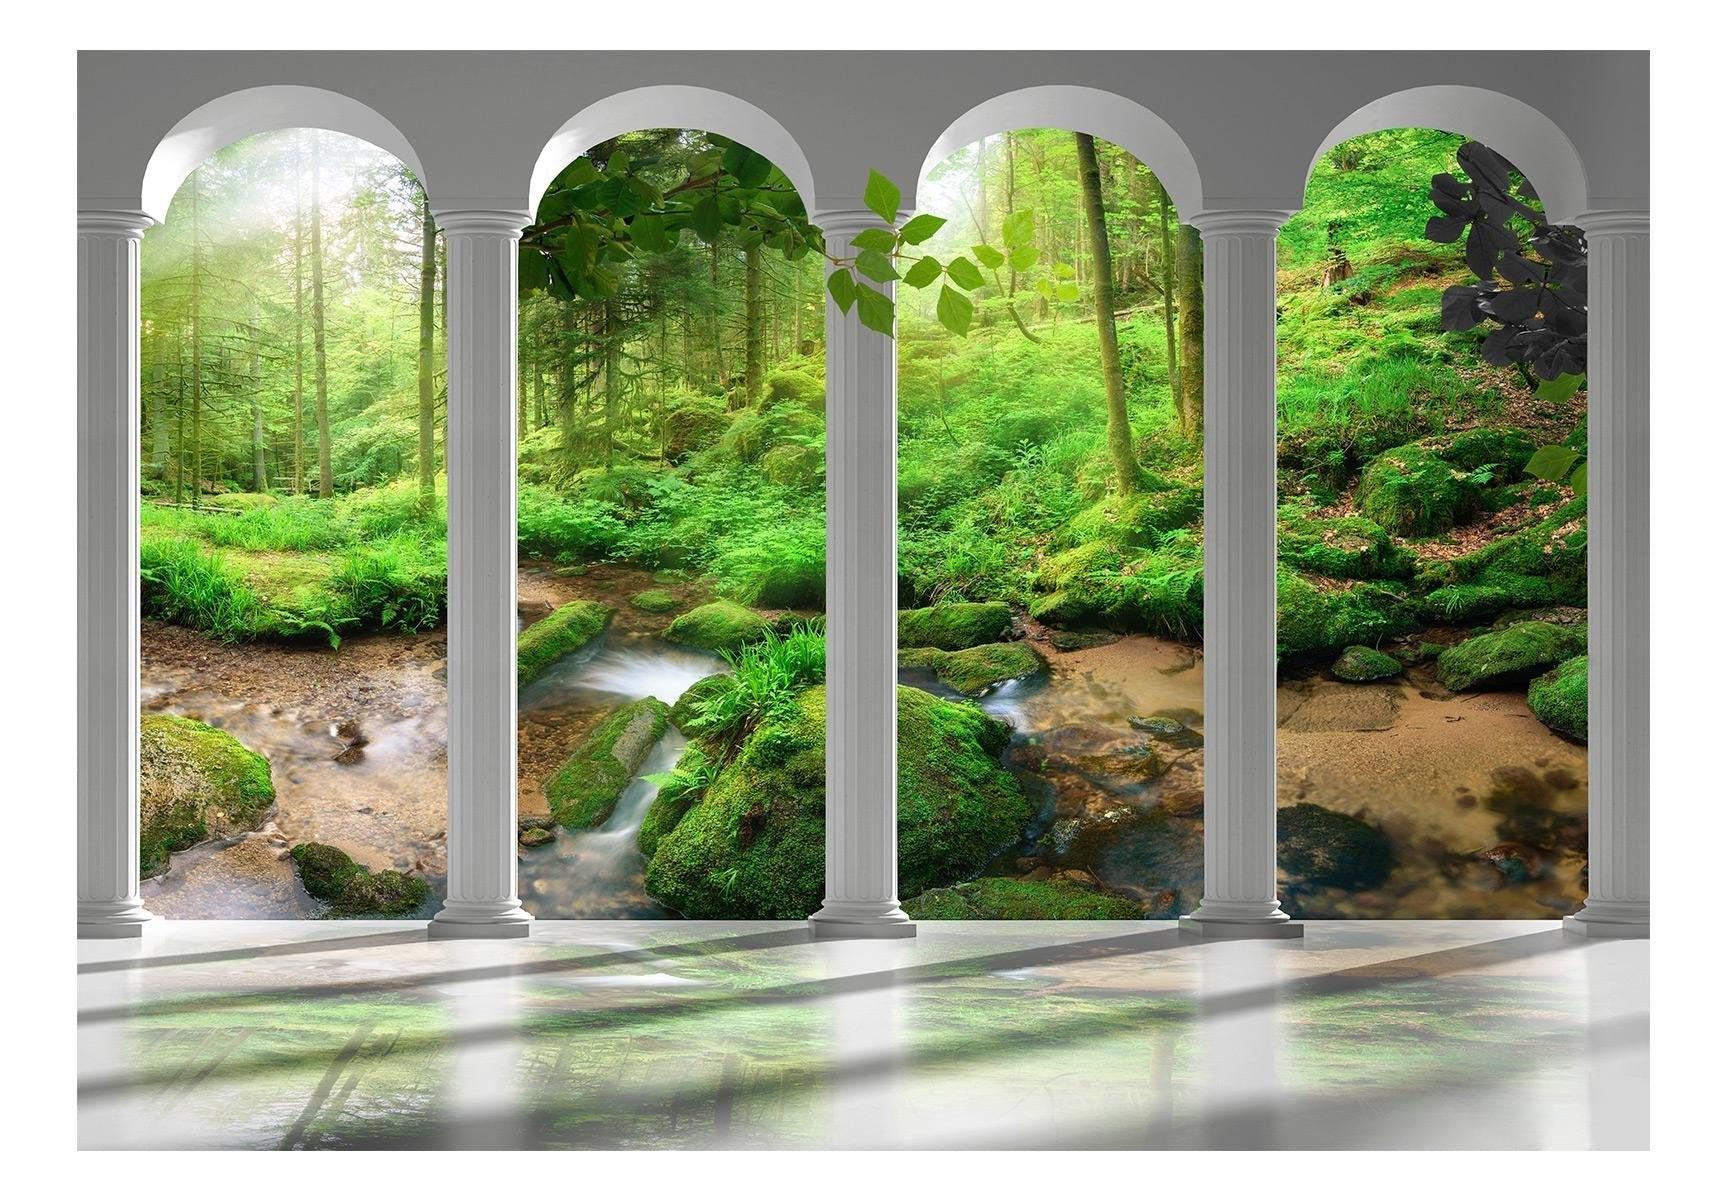 Peel and stick wall mural - Pillars and Forest - www.trendingbestsellers.com